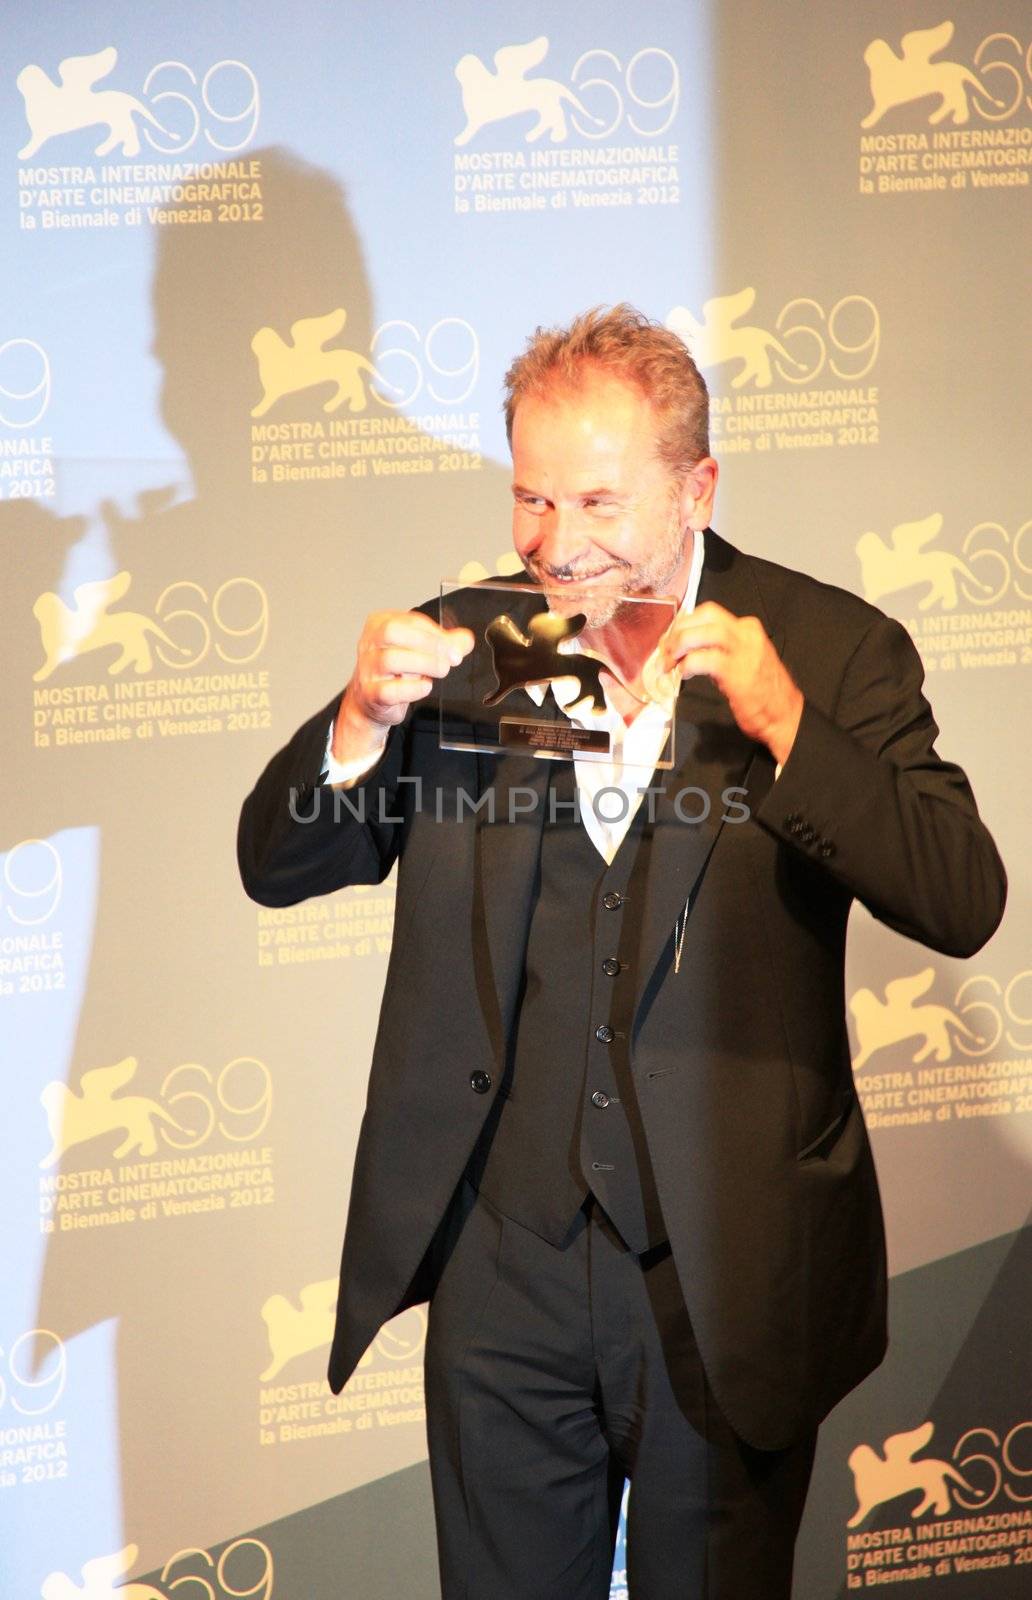 Ulrich Seidl poses for photographers at Venice Film Festival